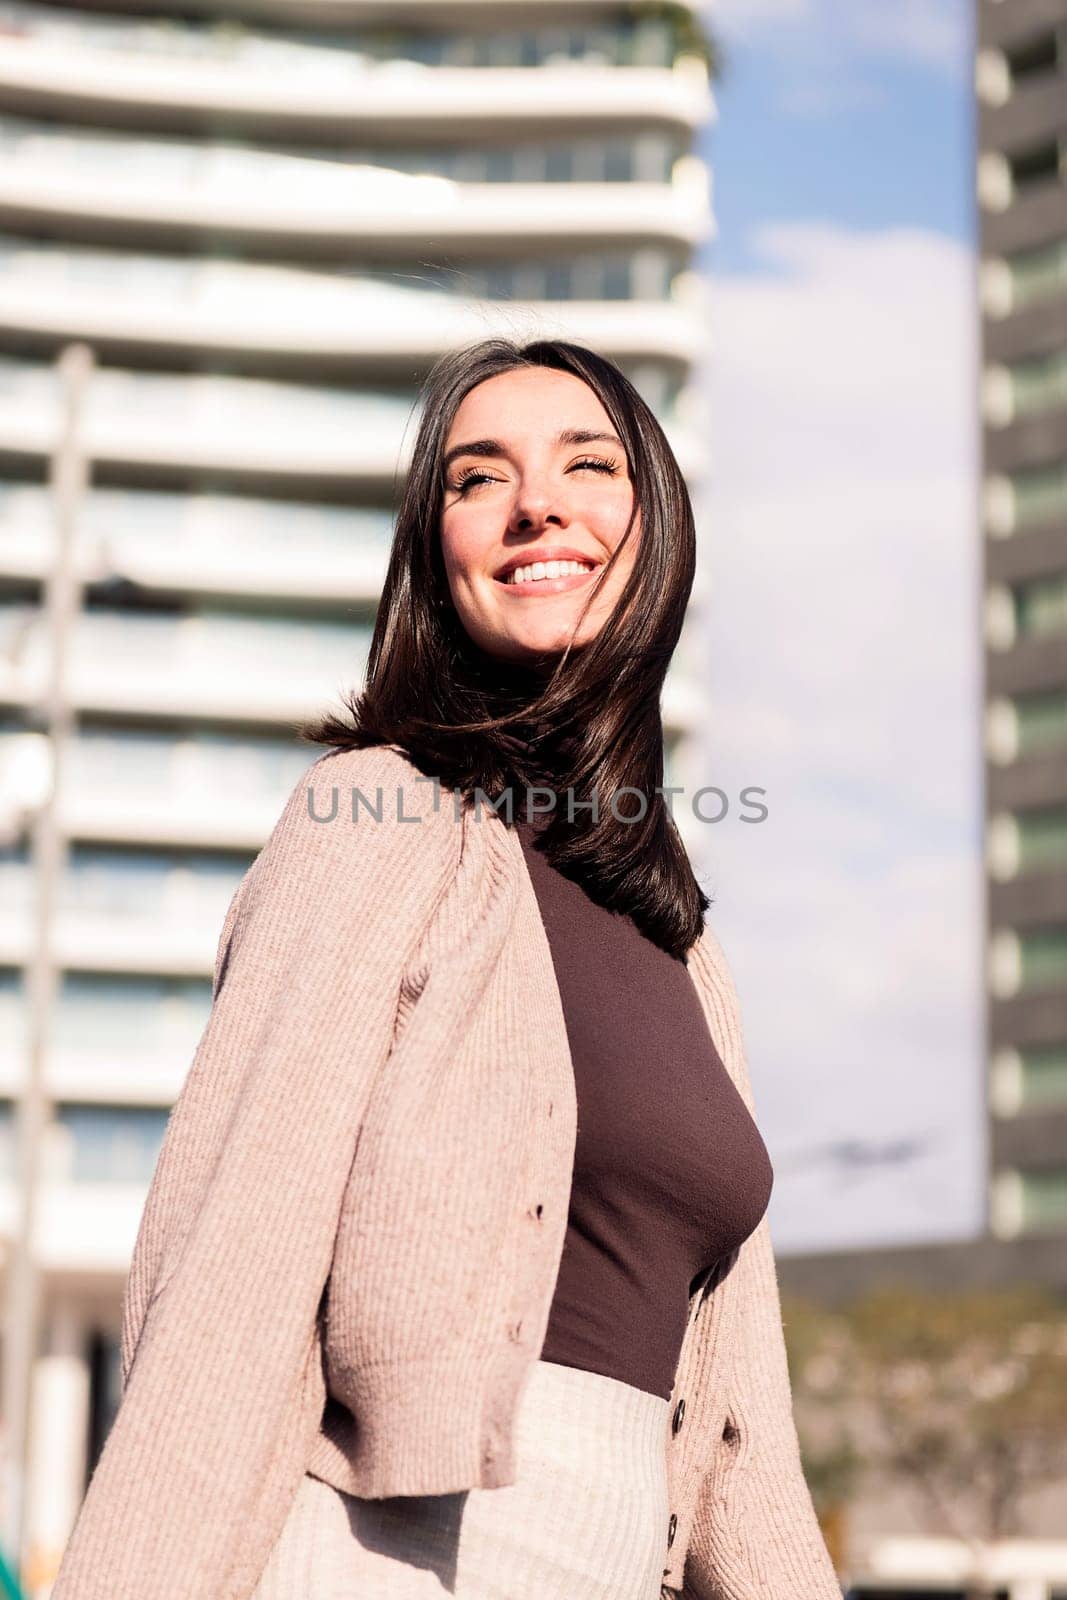 cheerful young woman smiling taking a walk in city streets, concept of happiness and urban lifestyle, copy space for text